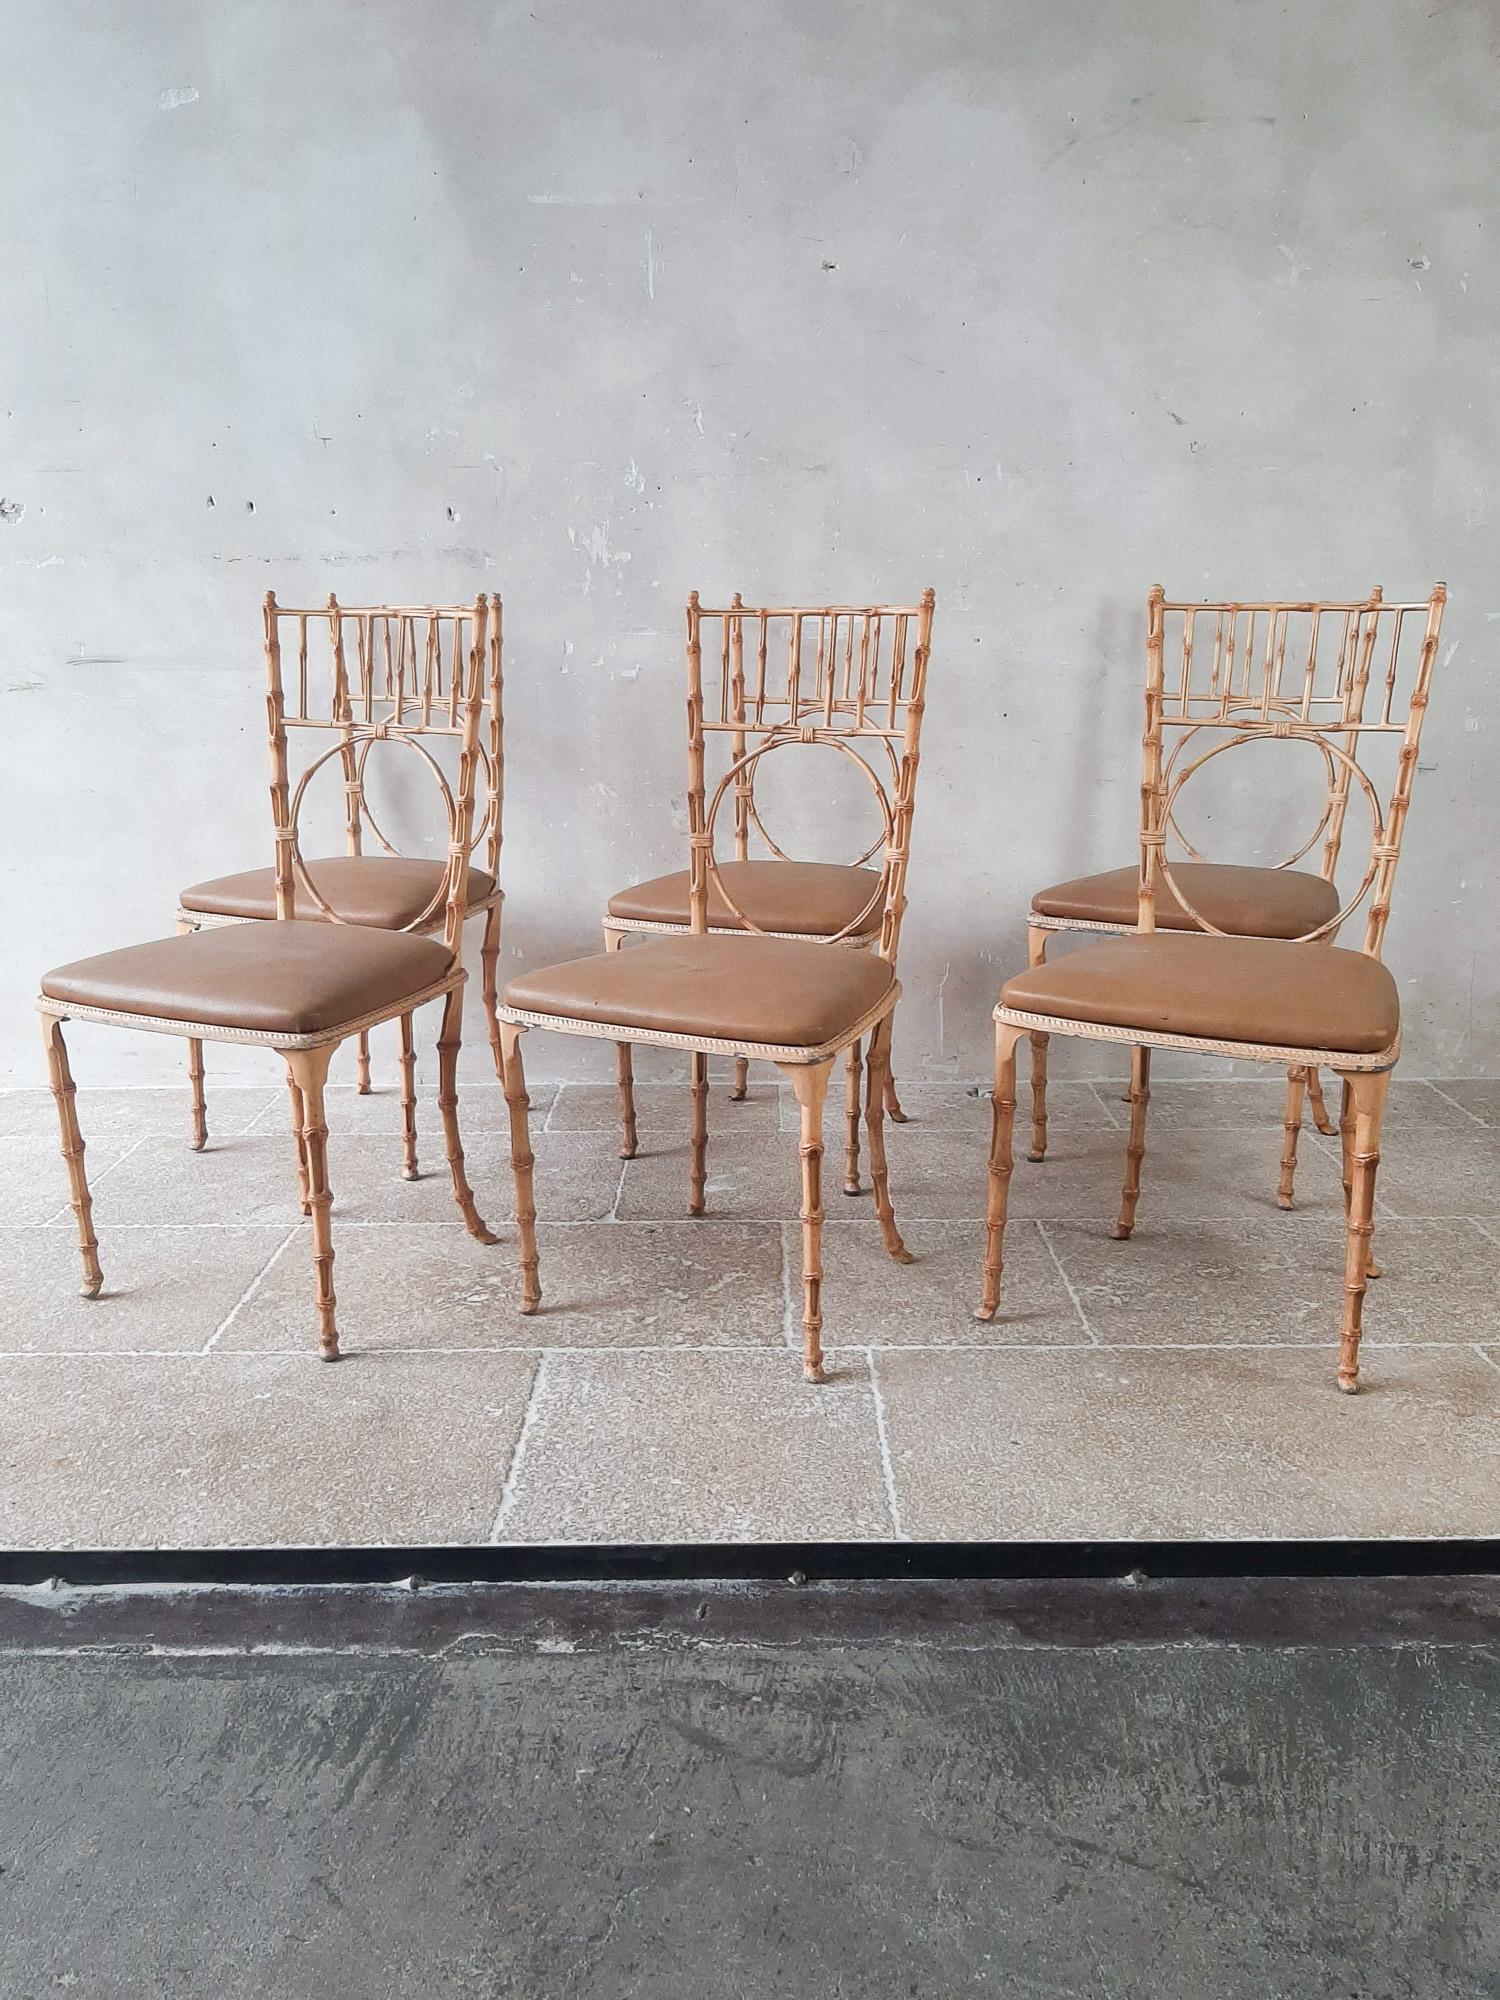 A set of 6 Mid-Century Modern faux bamboo aluminium painted dining chairs with original cognac brown skai upholstery, from the 1950s.

Chinese -Chippendale style, Hollywood Regency style

Measures: H 88 x W 44 x D 40 cm
seat height: 44 cm.